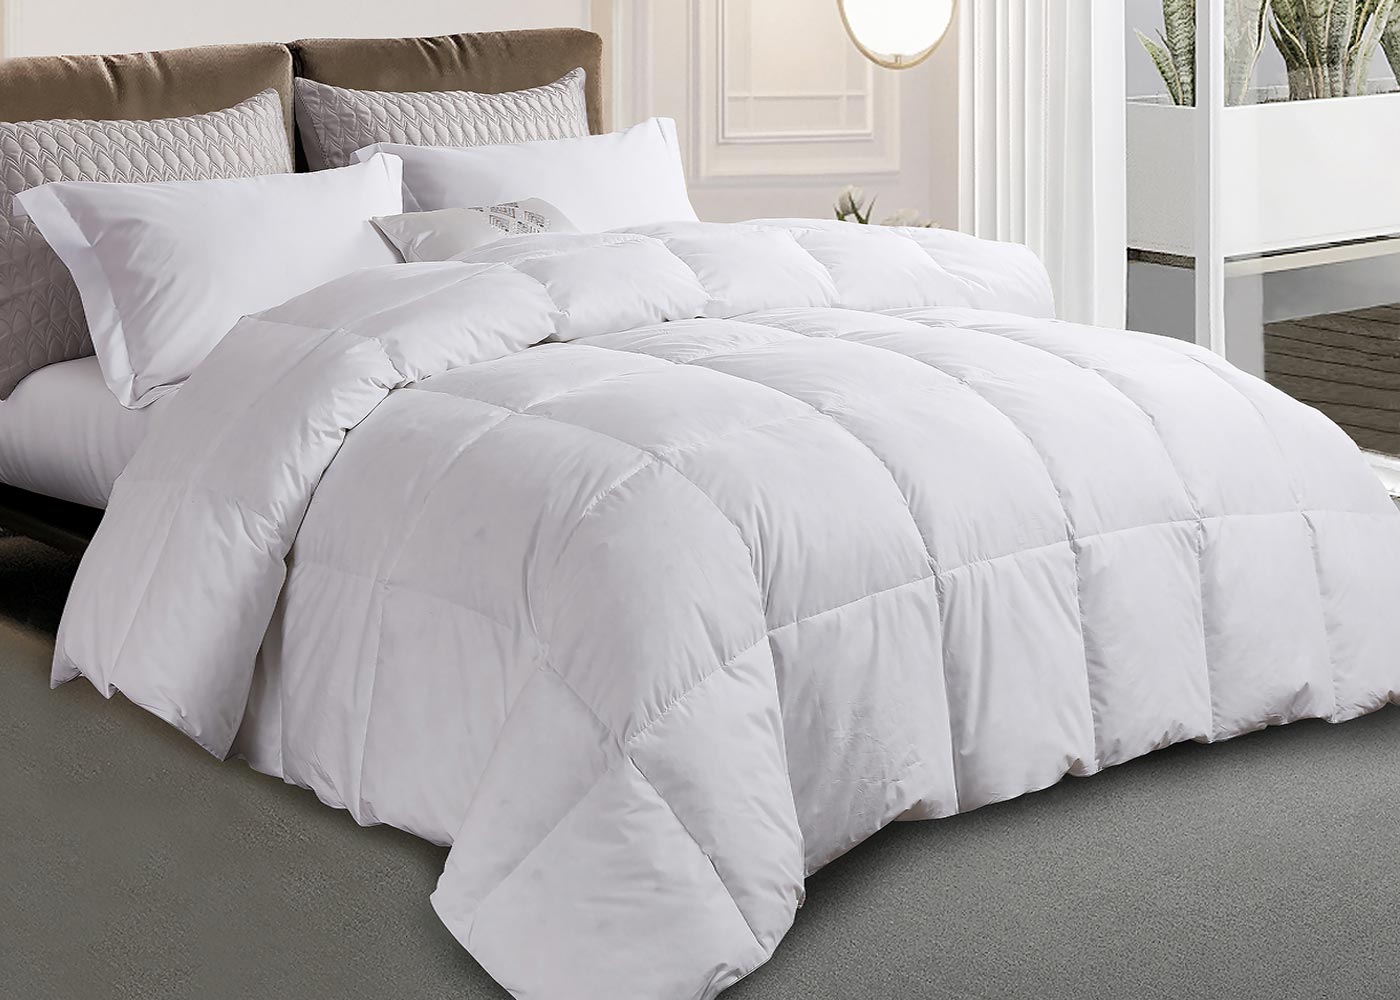 White Goose Feather and Down Comforter by Kathy Ireland Home